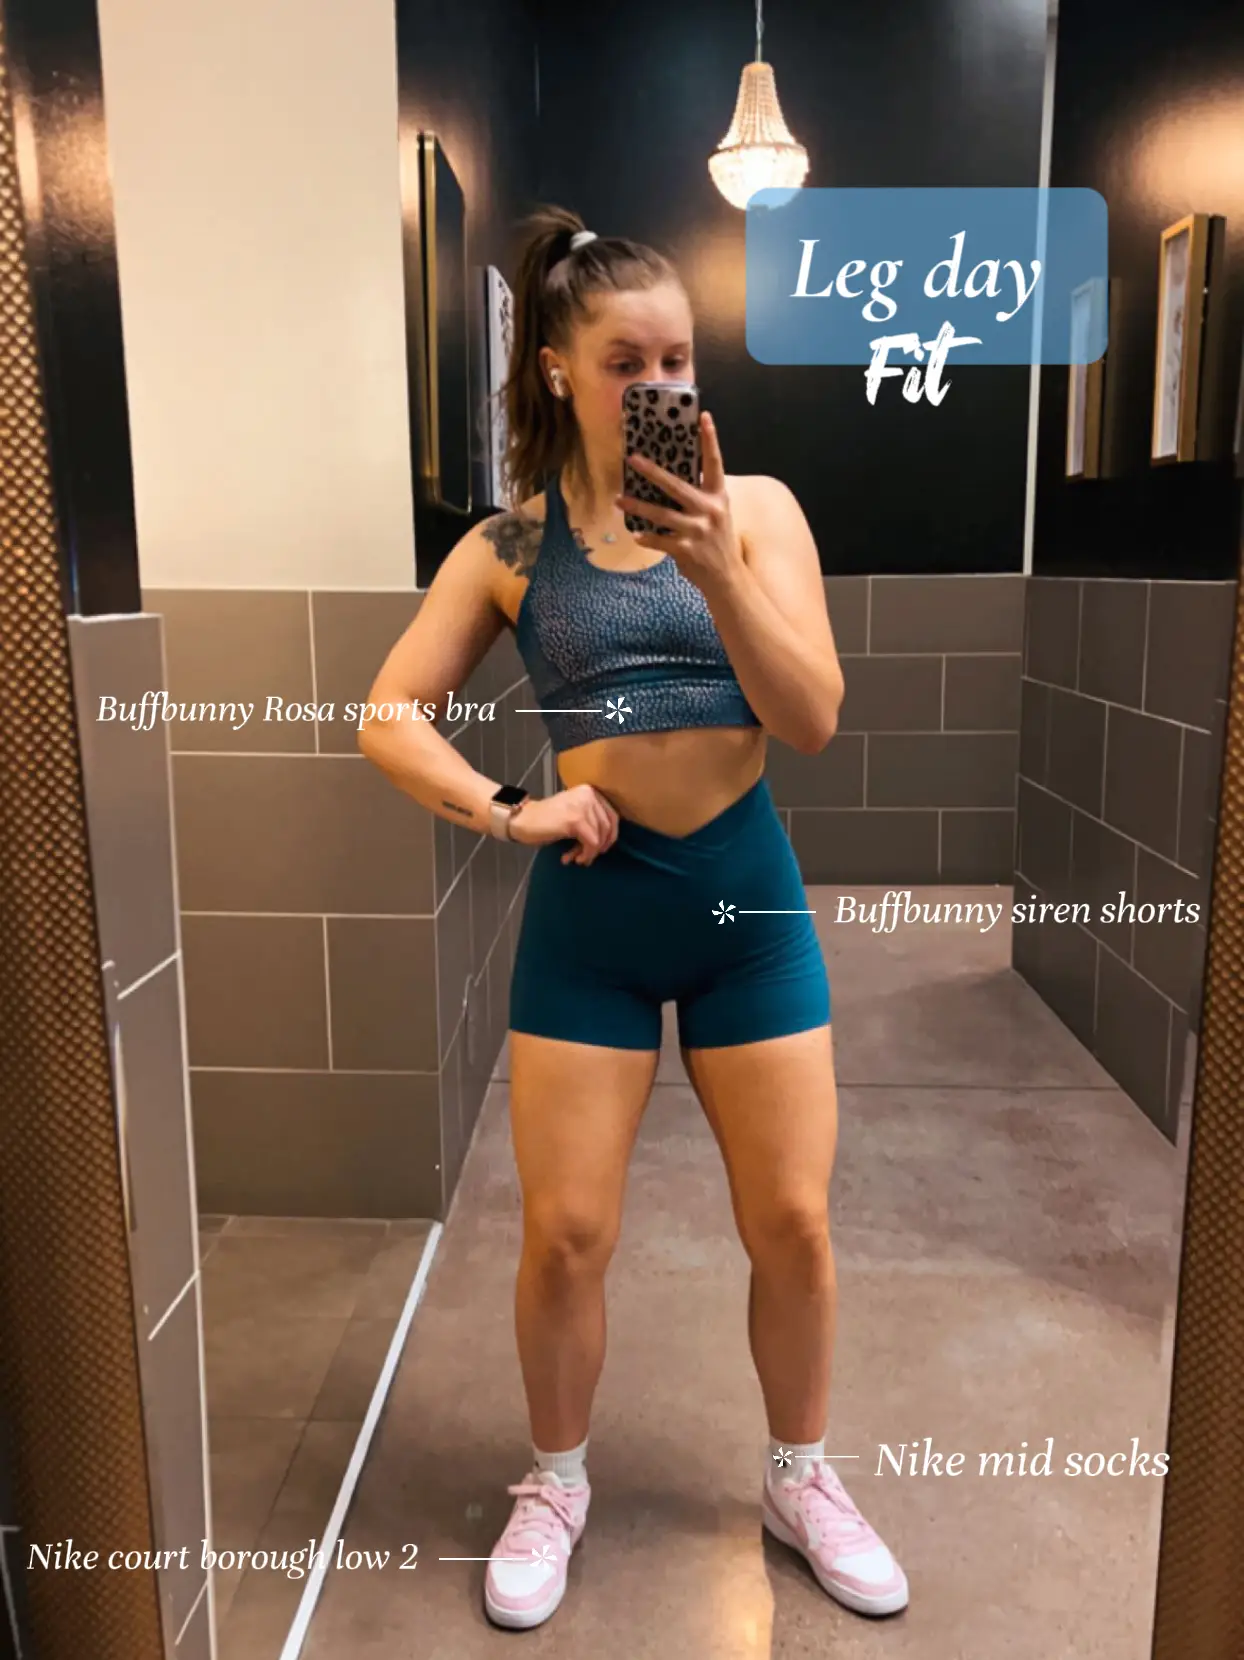 Buffbunny Gym Shorts Try On and Review 